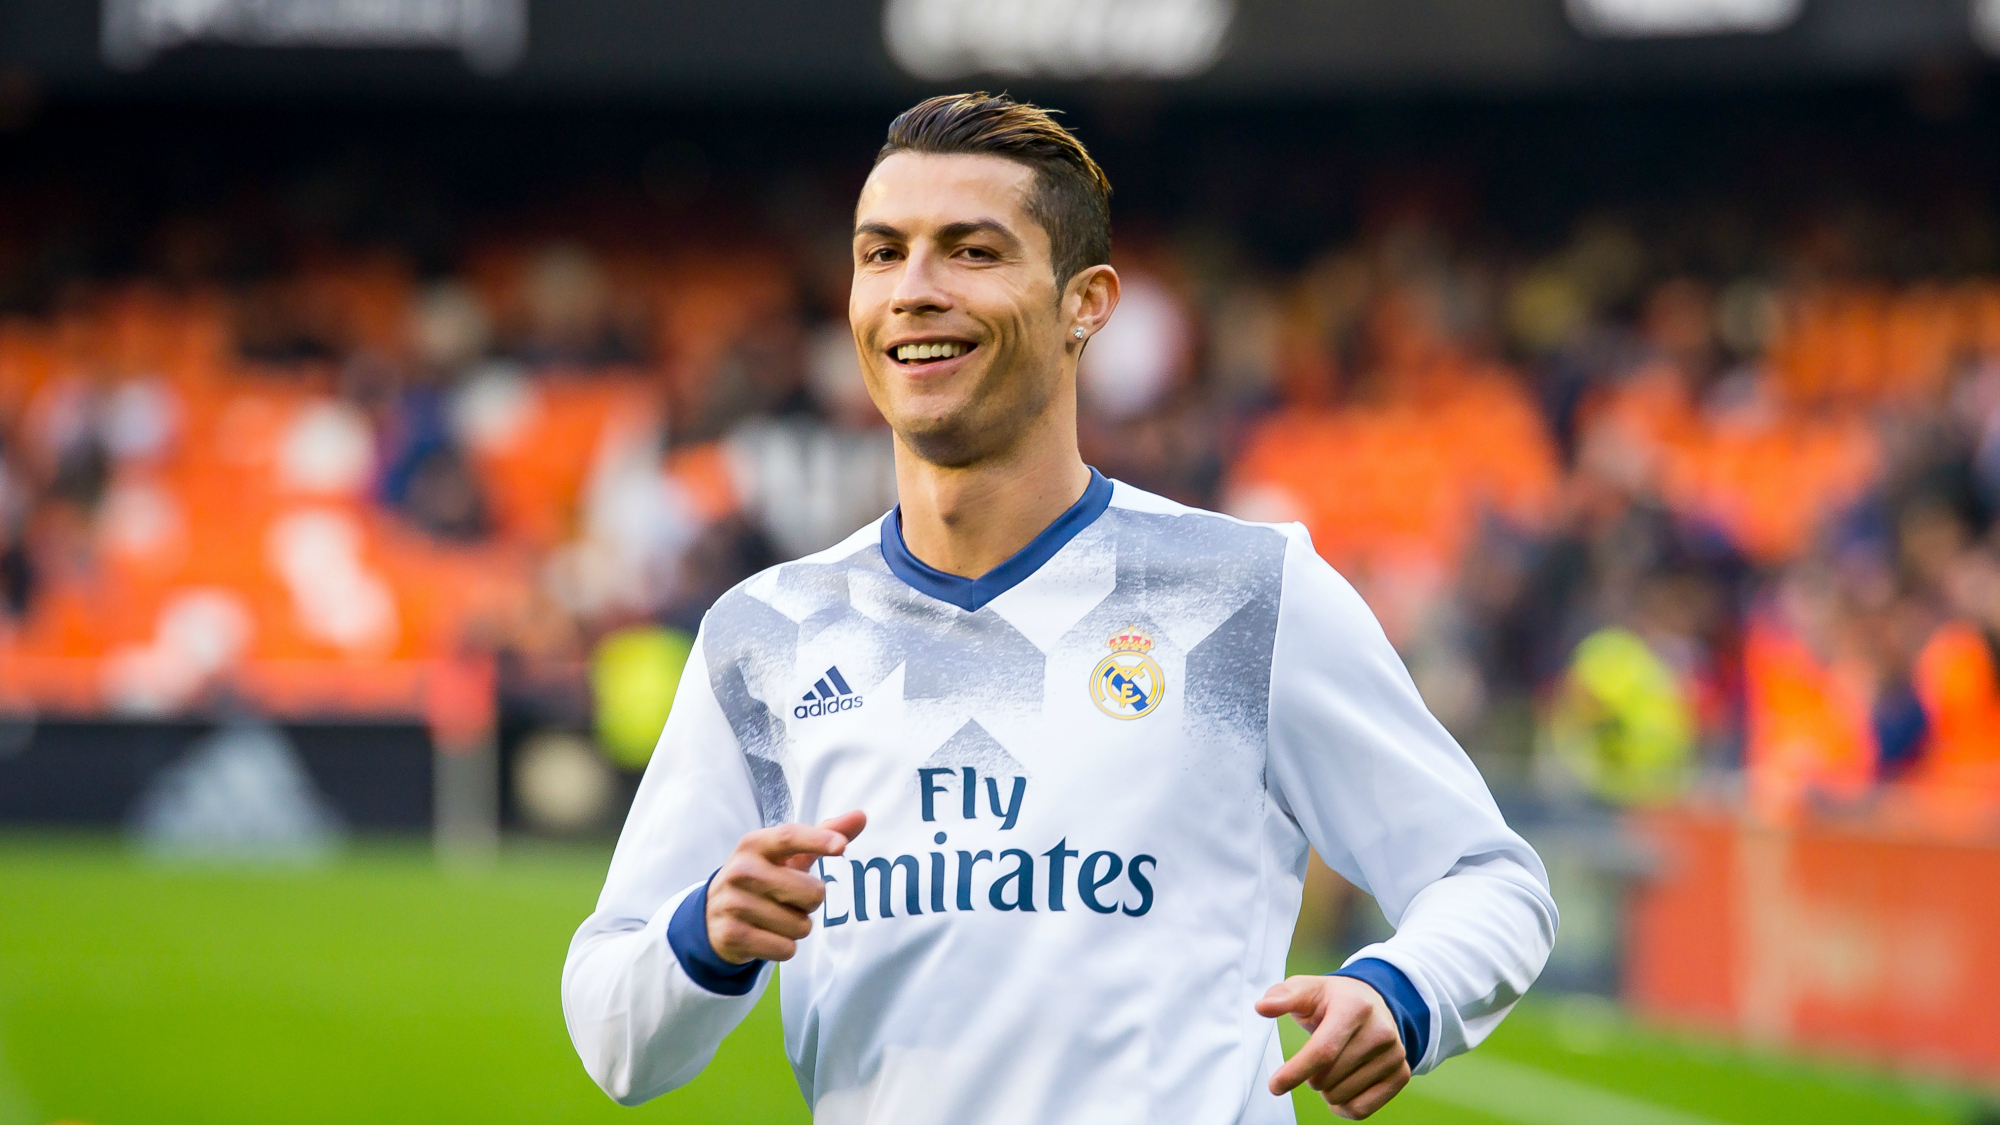 Will Cristiano Ronaldo Transfer From Real Madrid? All Signs Point To Maybe.